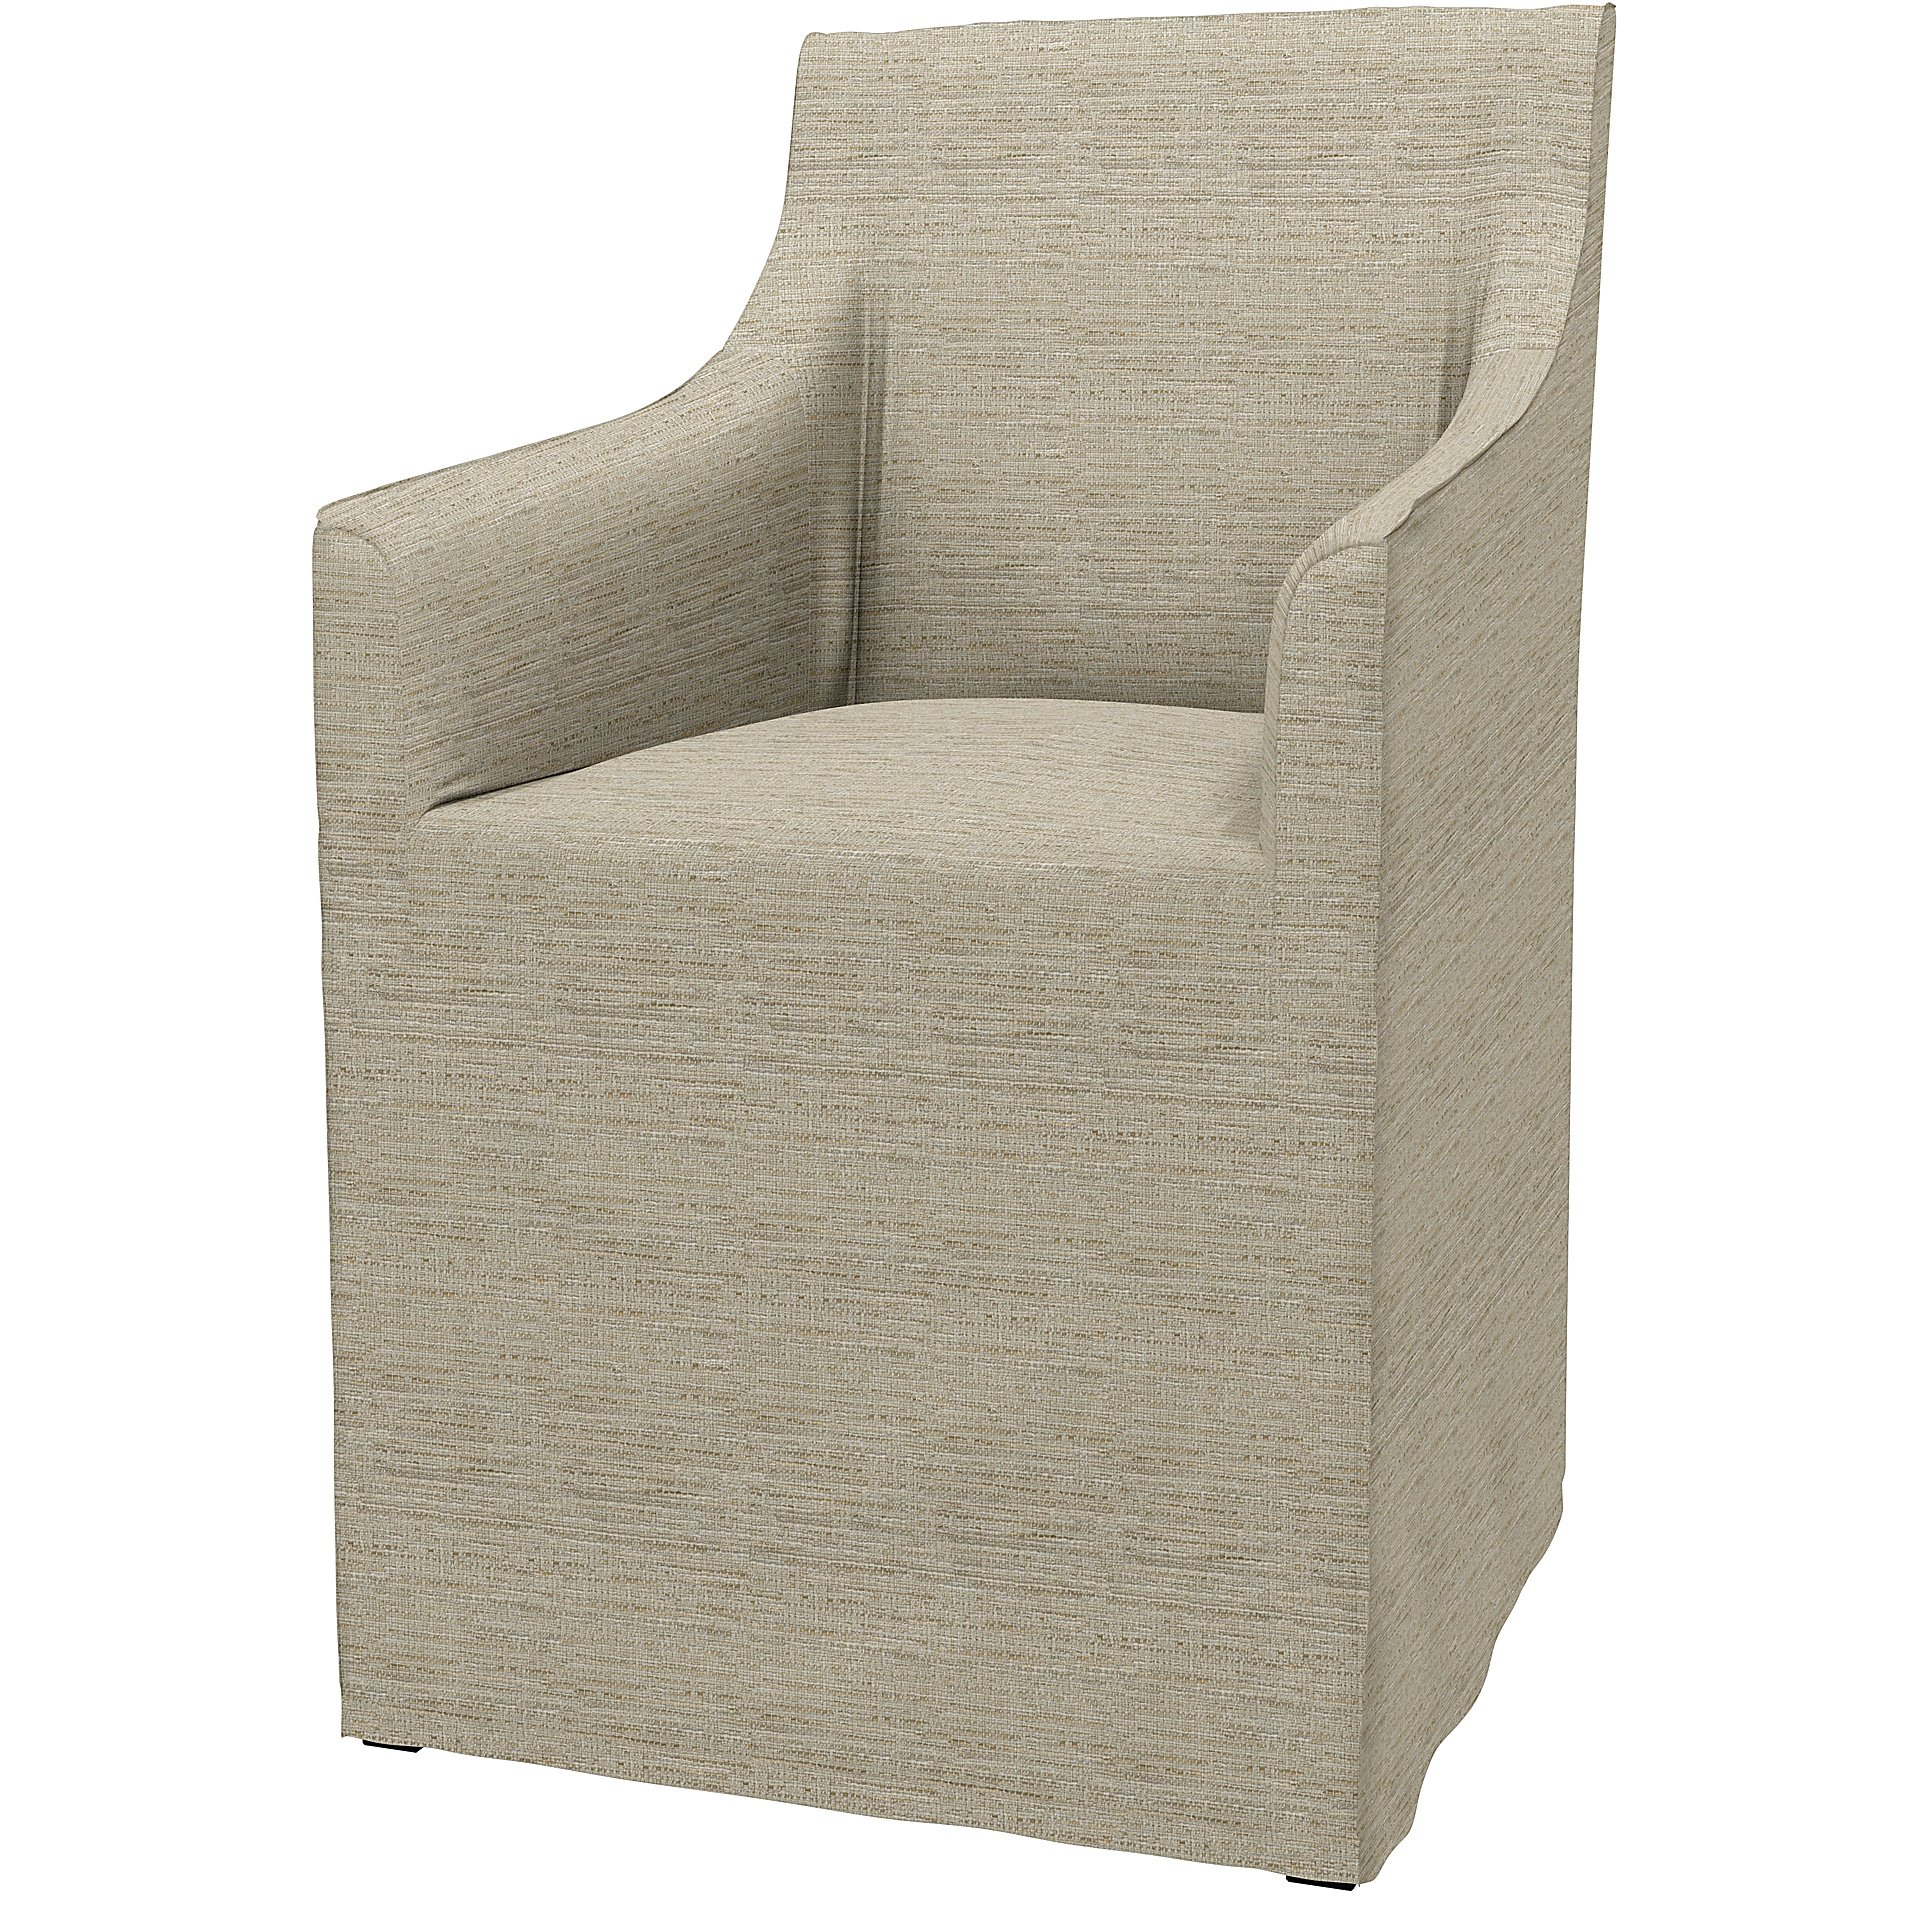 IKEA - Sakarias Chair with Armrests Cover, Light Sand, Boucle & Texture - Bemz